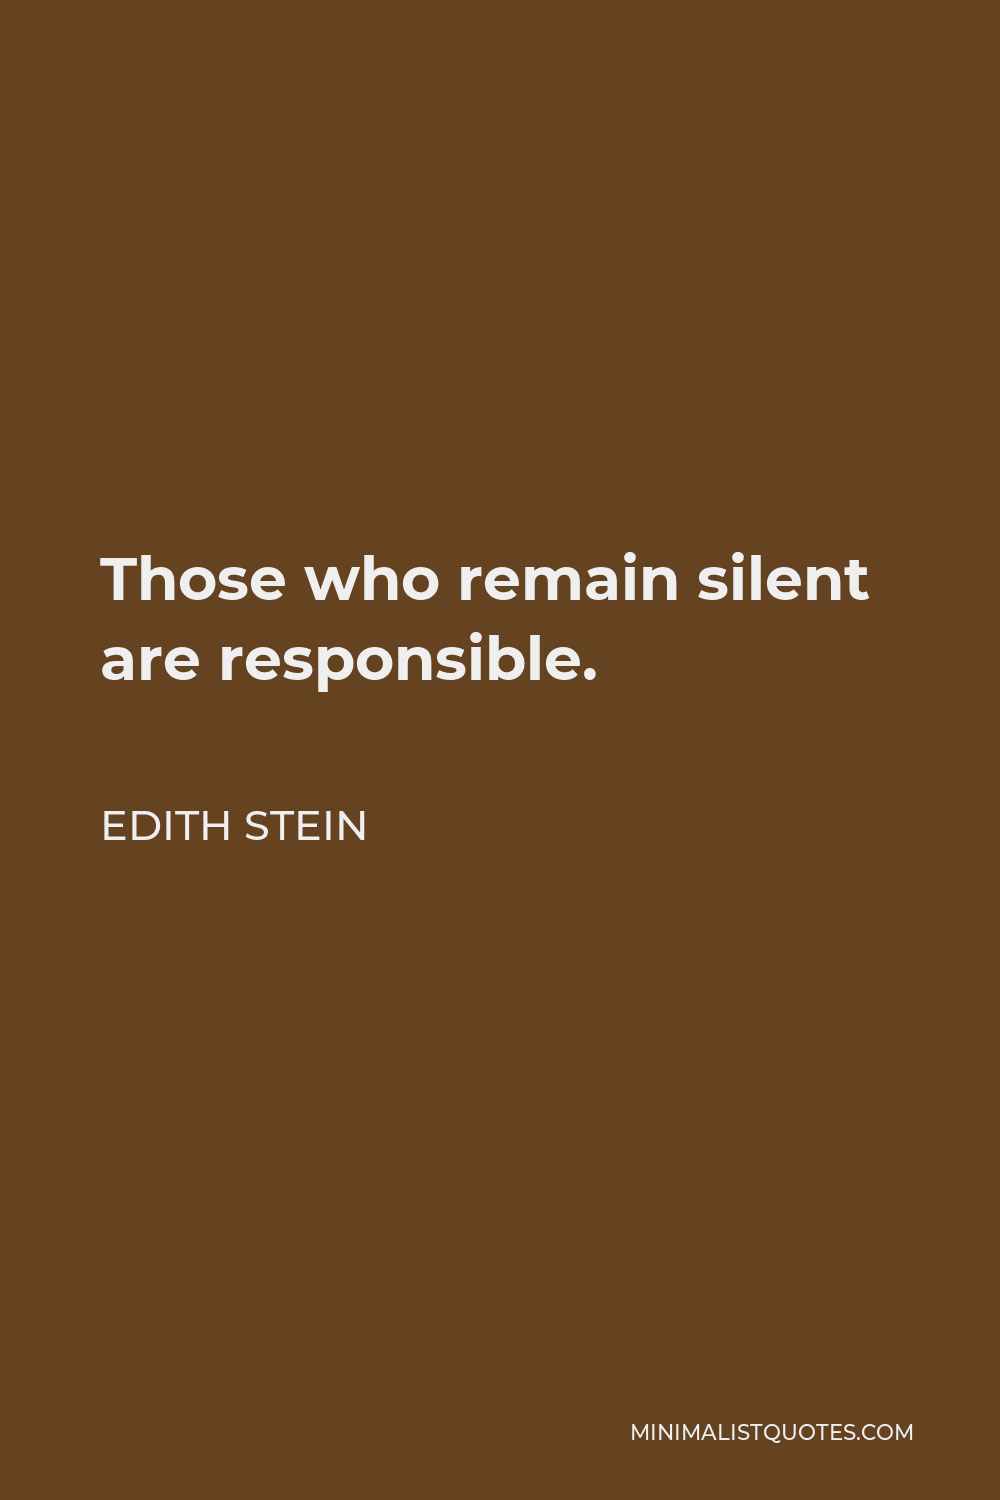 Edith Stein Quote - Those who remain silent are responsible.